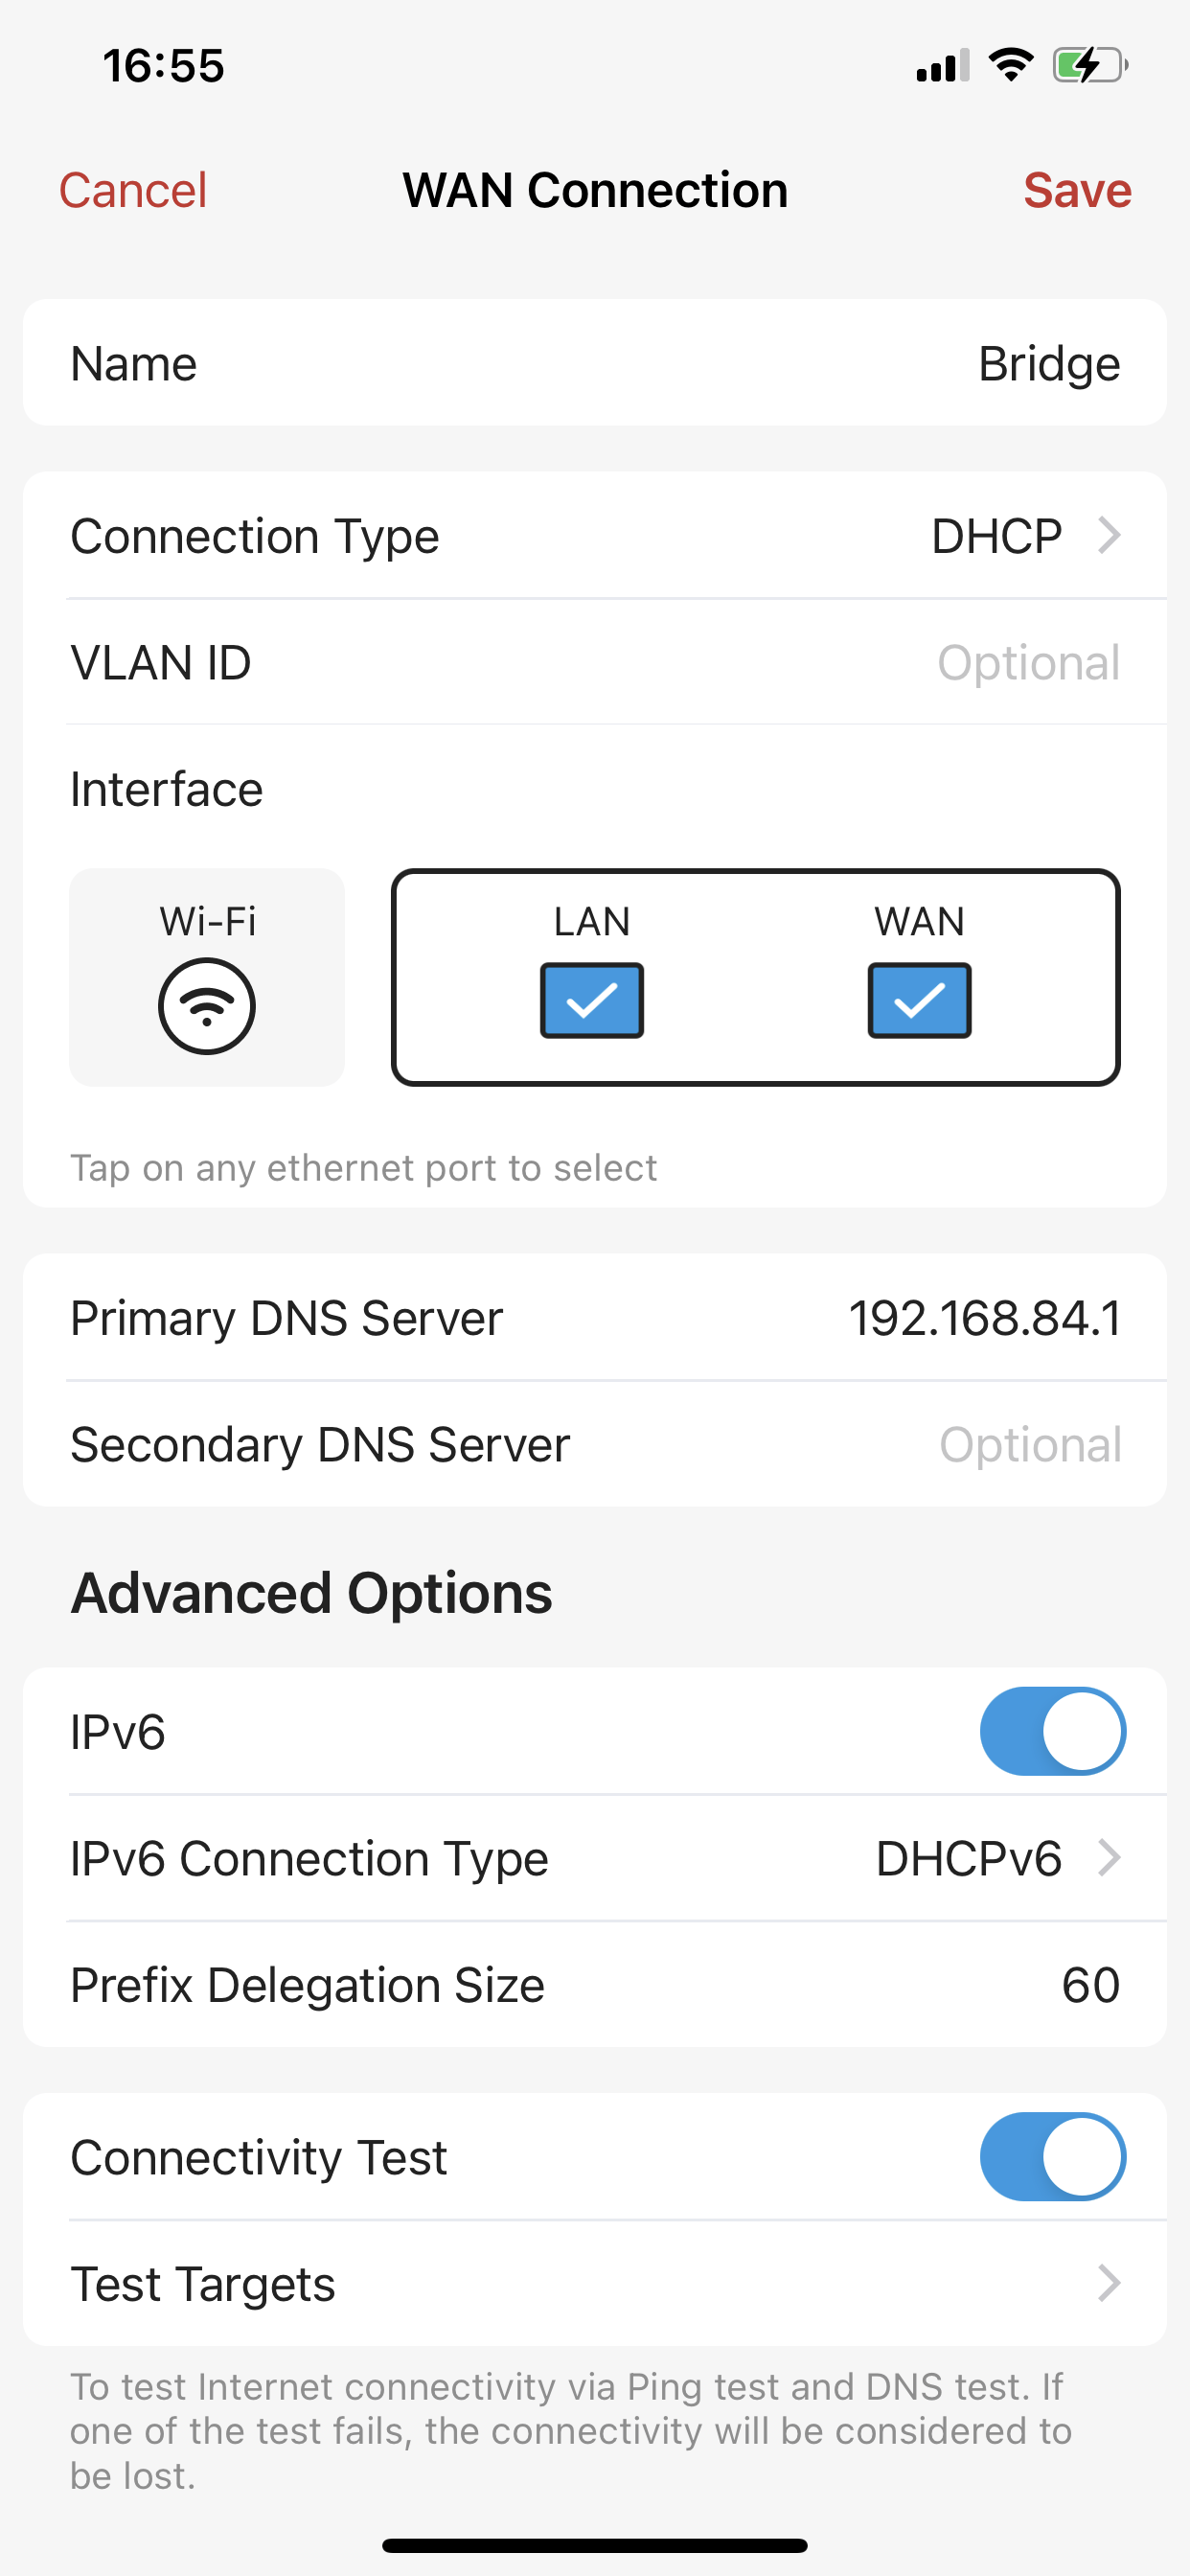 IUse Firewalla network manager to enable Wi-Fi interface, currently off.